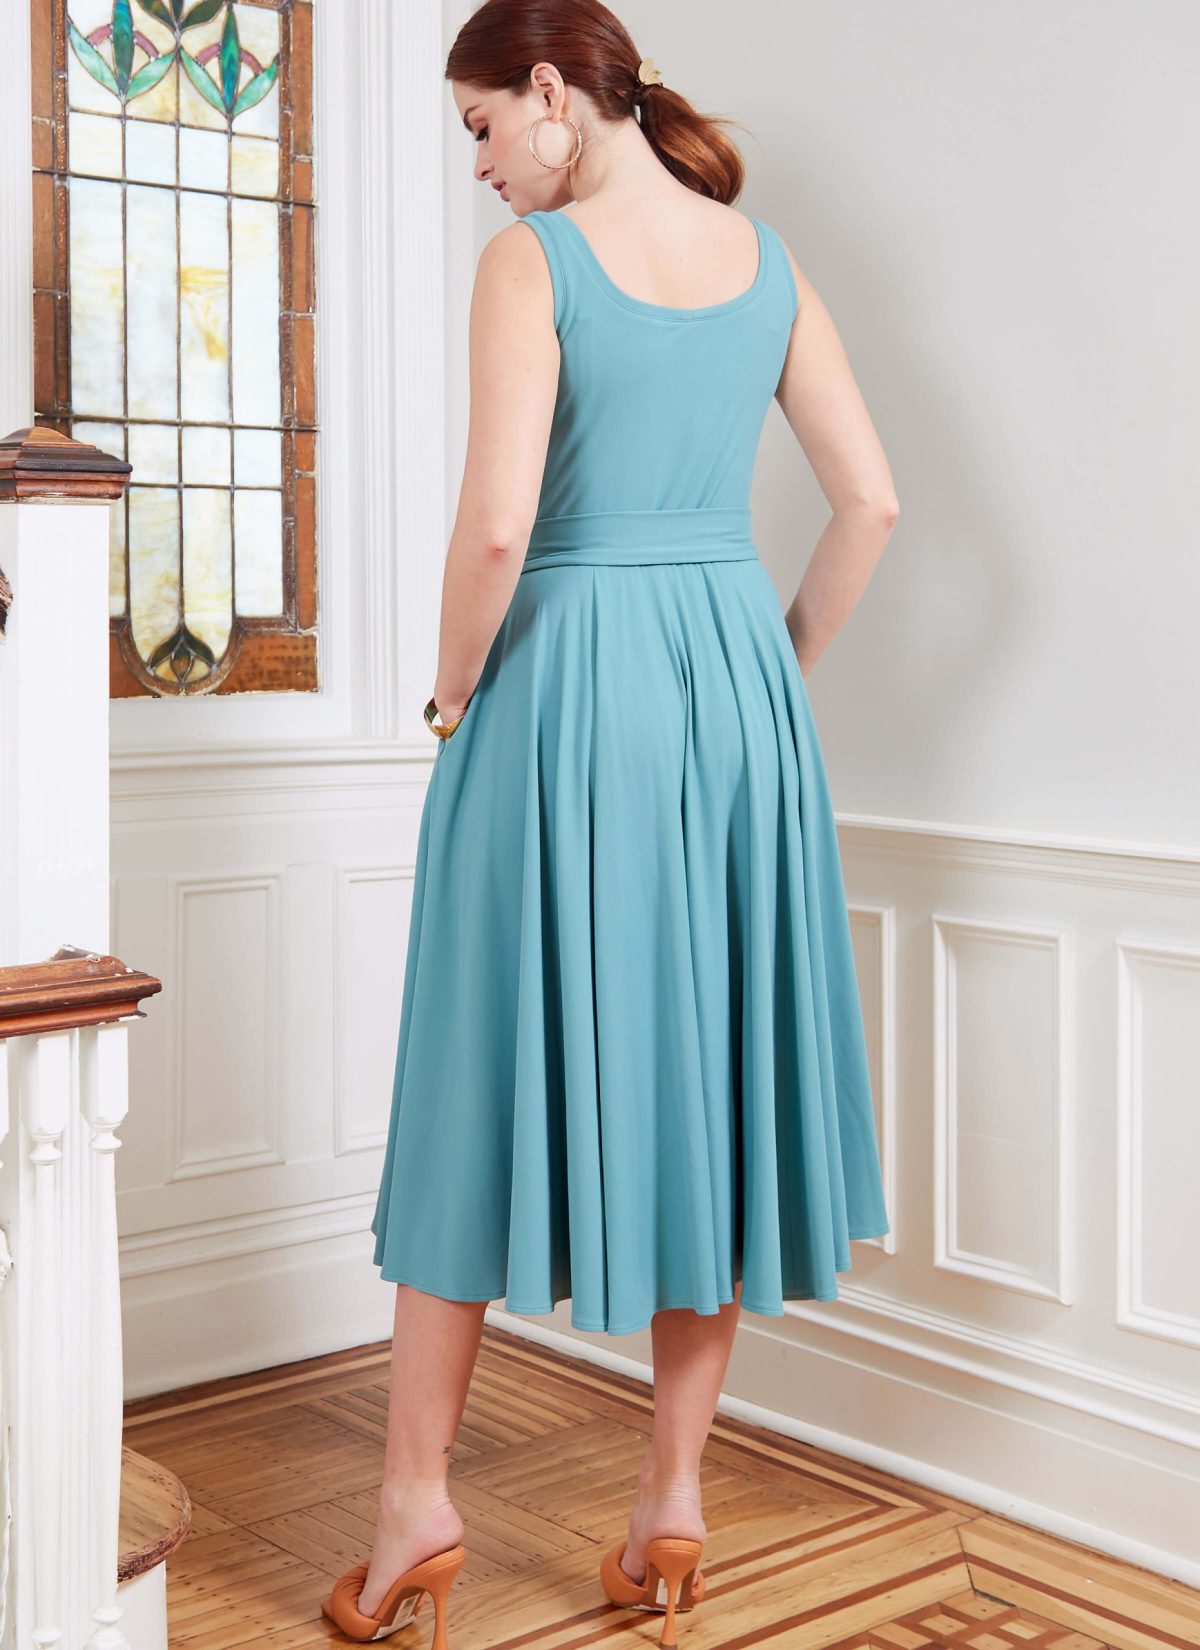 McCall's Sewing Pattern M8215 Misses' & Women's Dresses